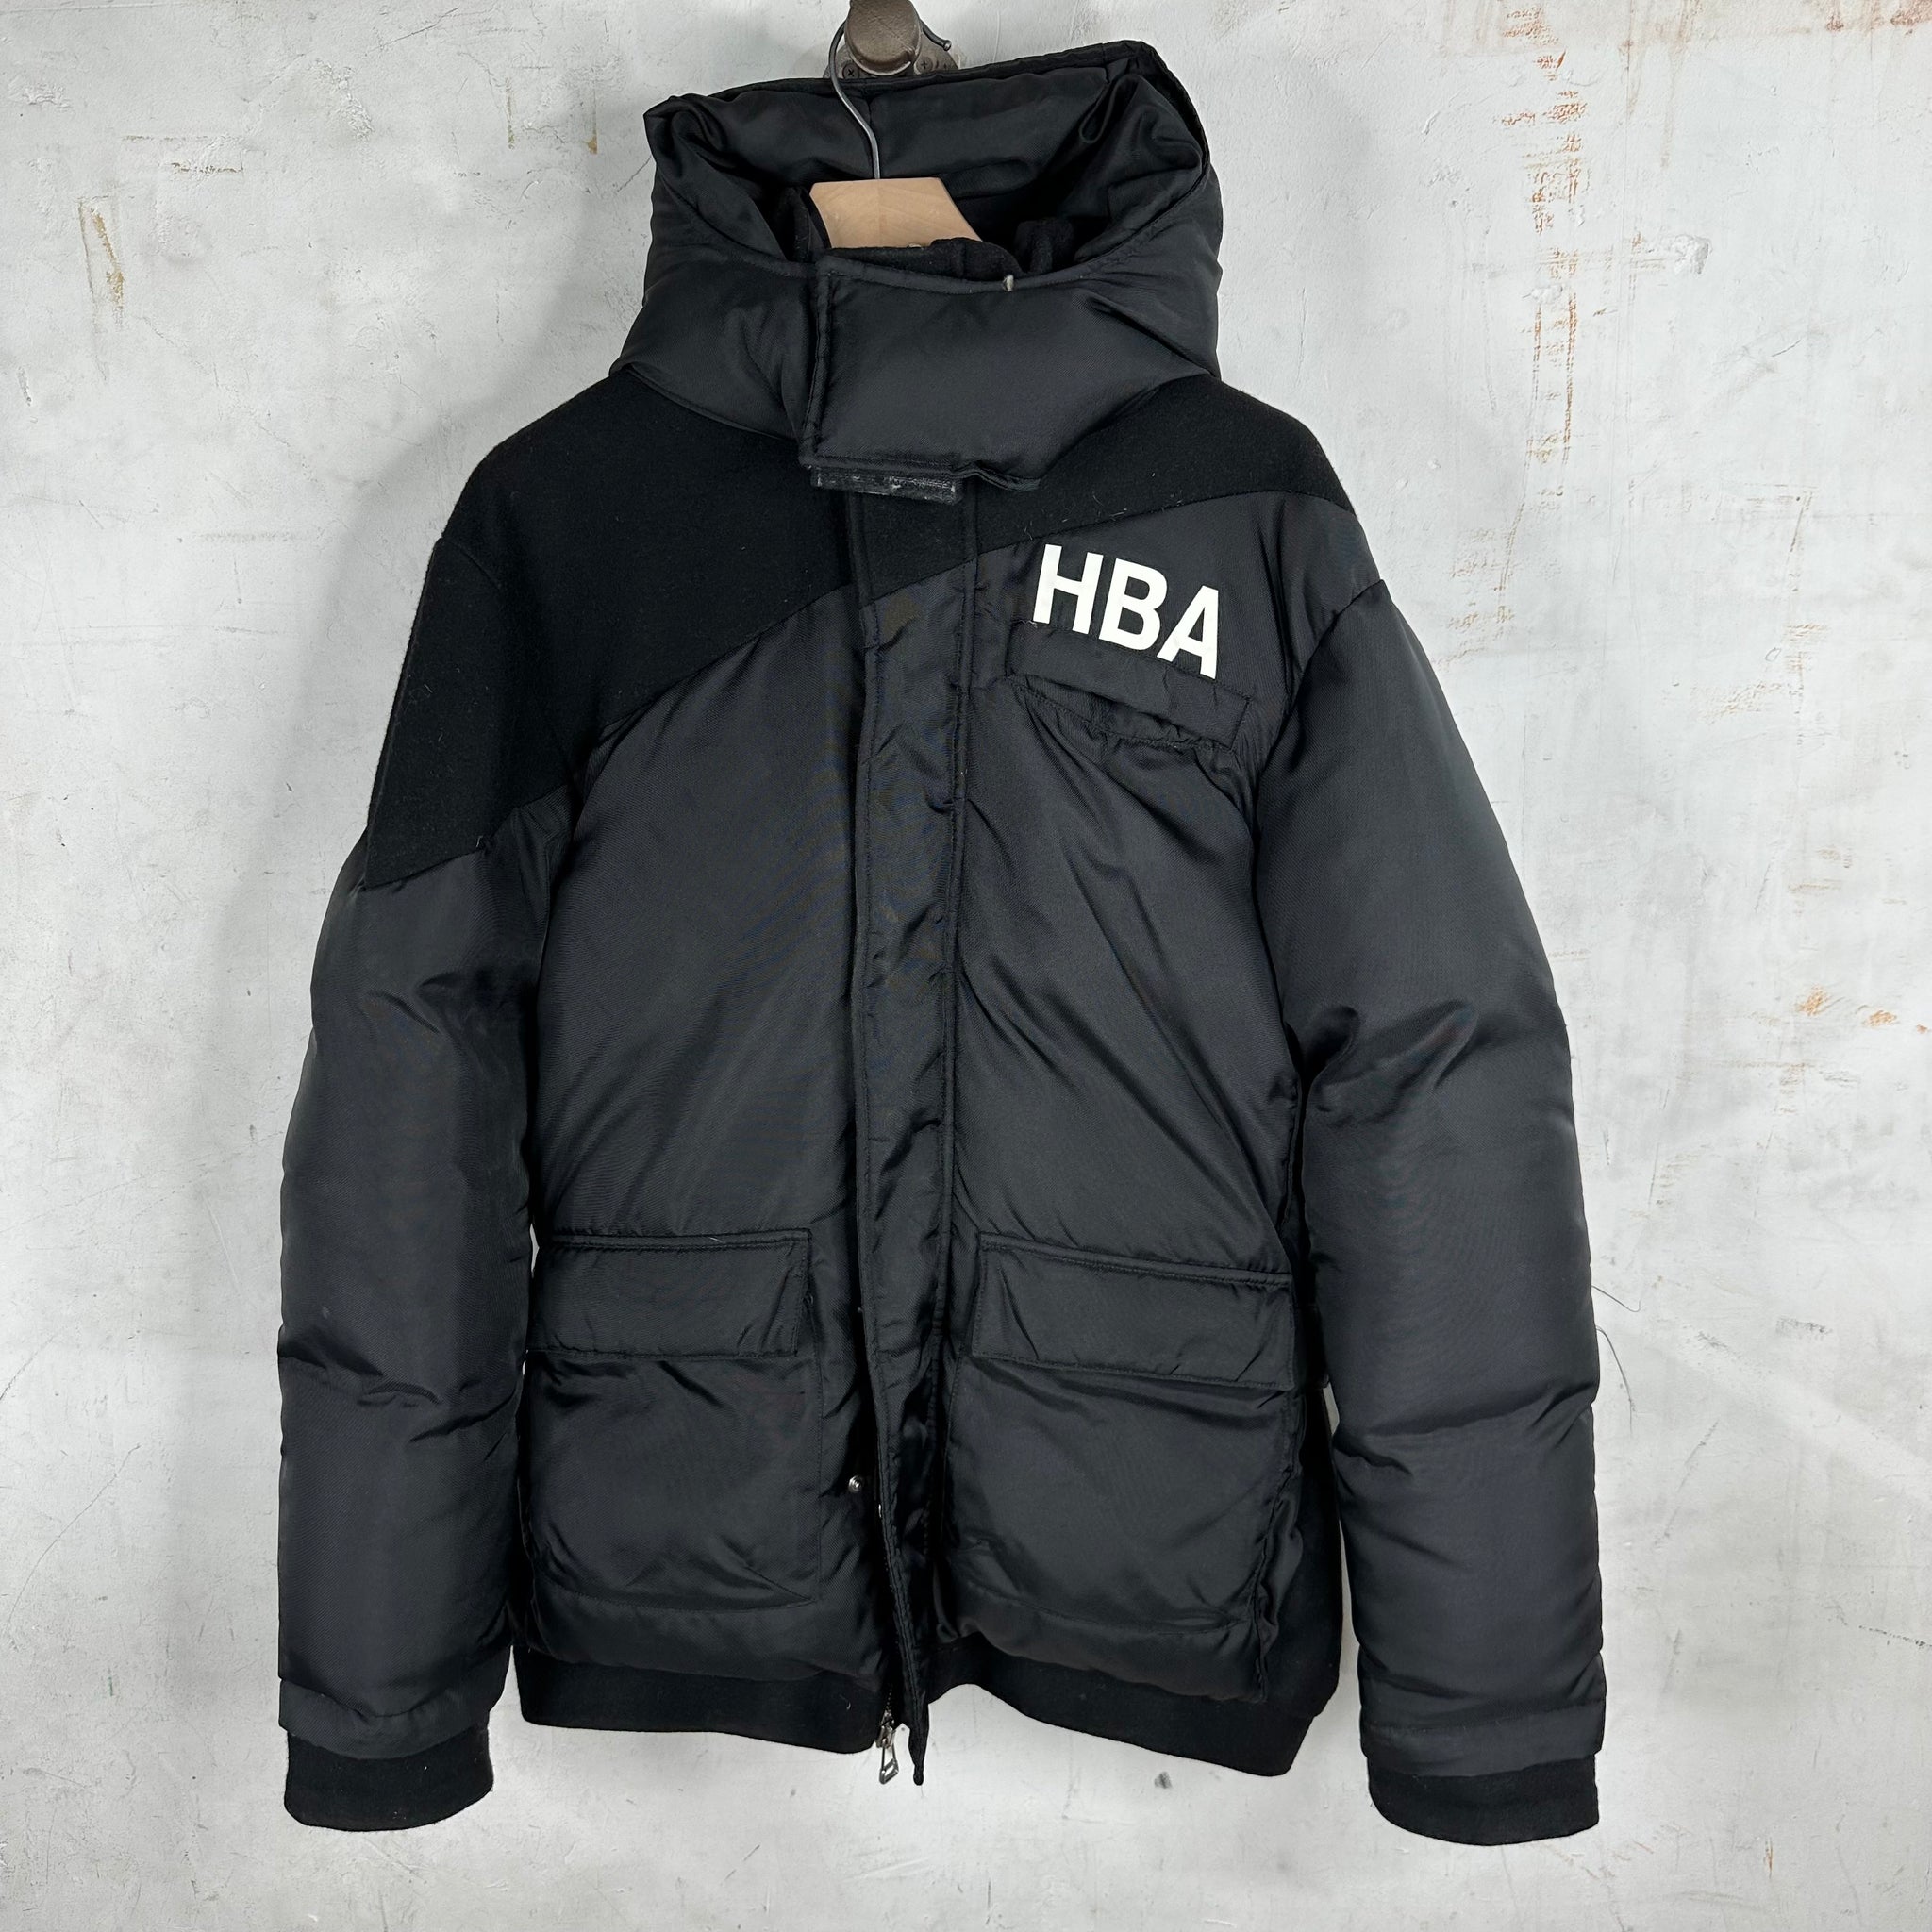 Hood by Air Strapped Puffer Jacket